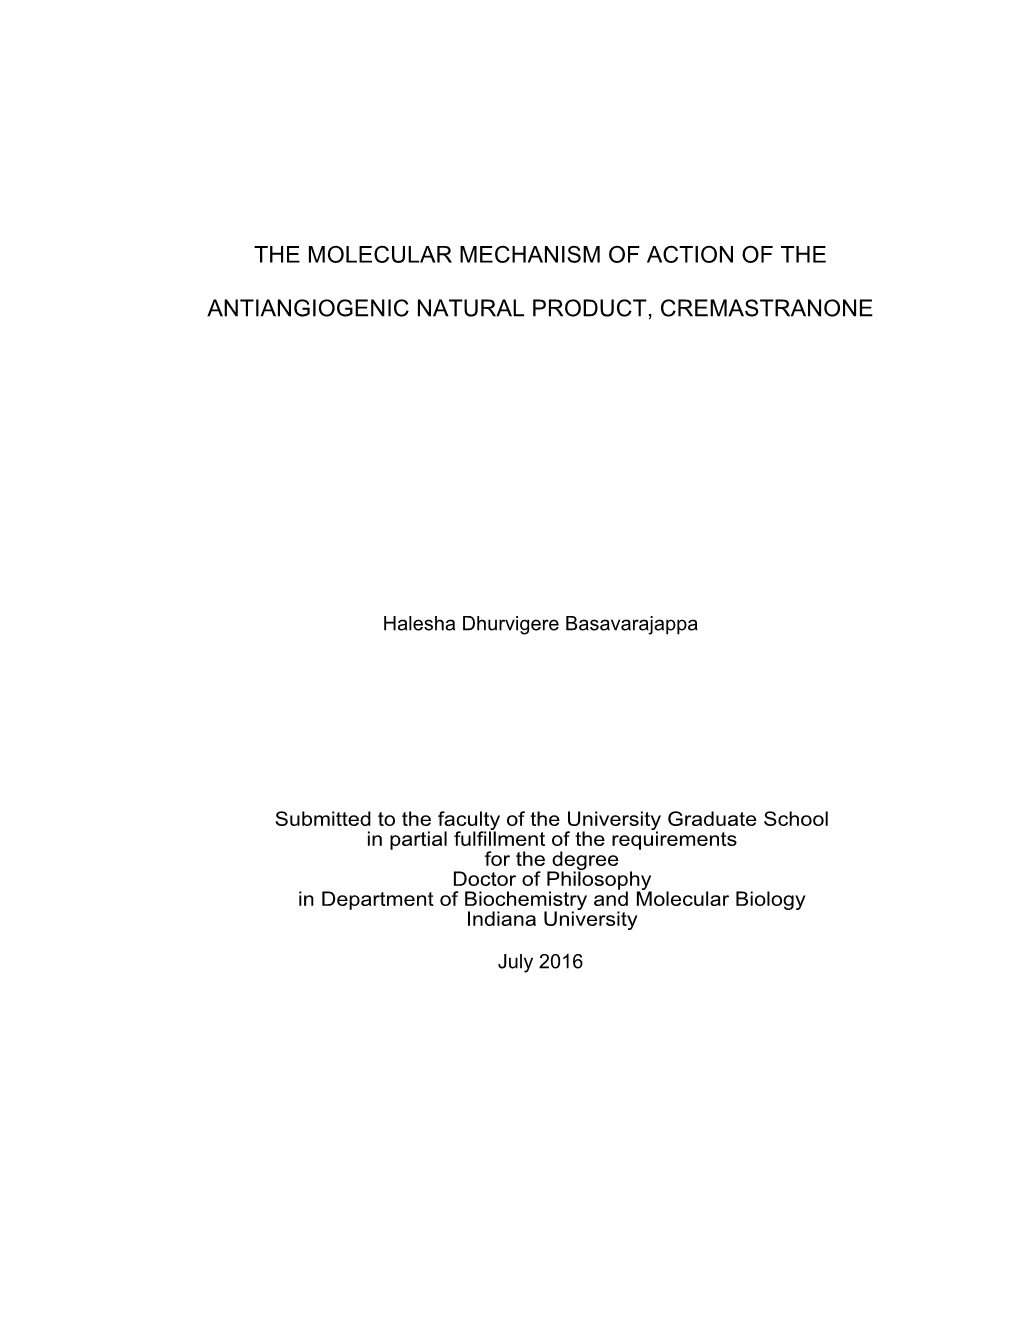 The Molecular Mechanism of Action of The